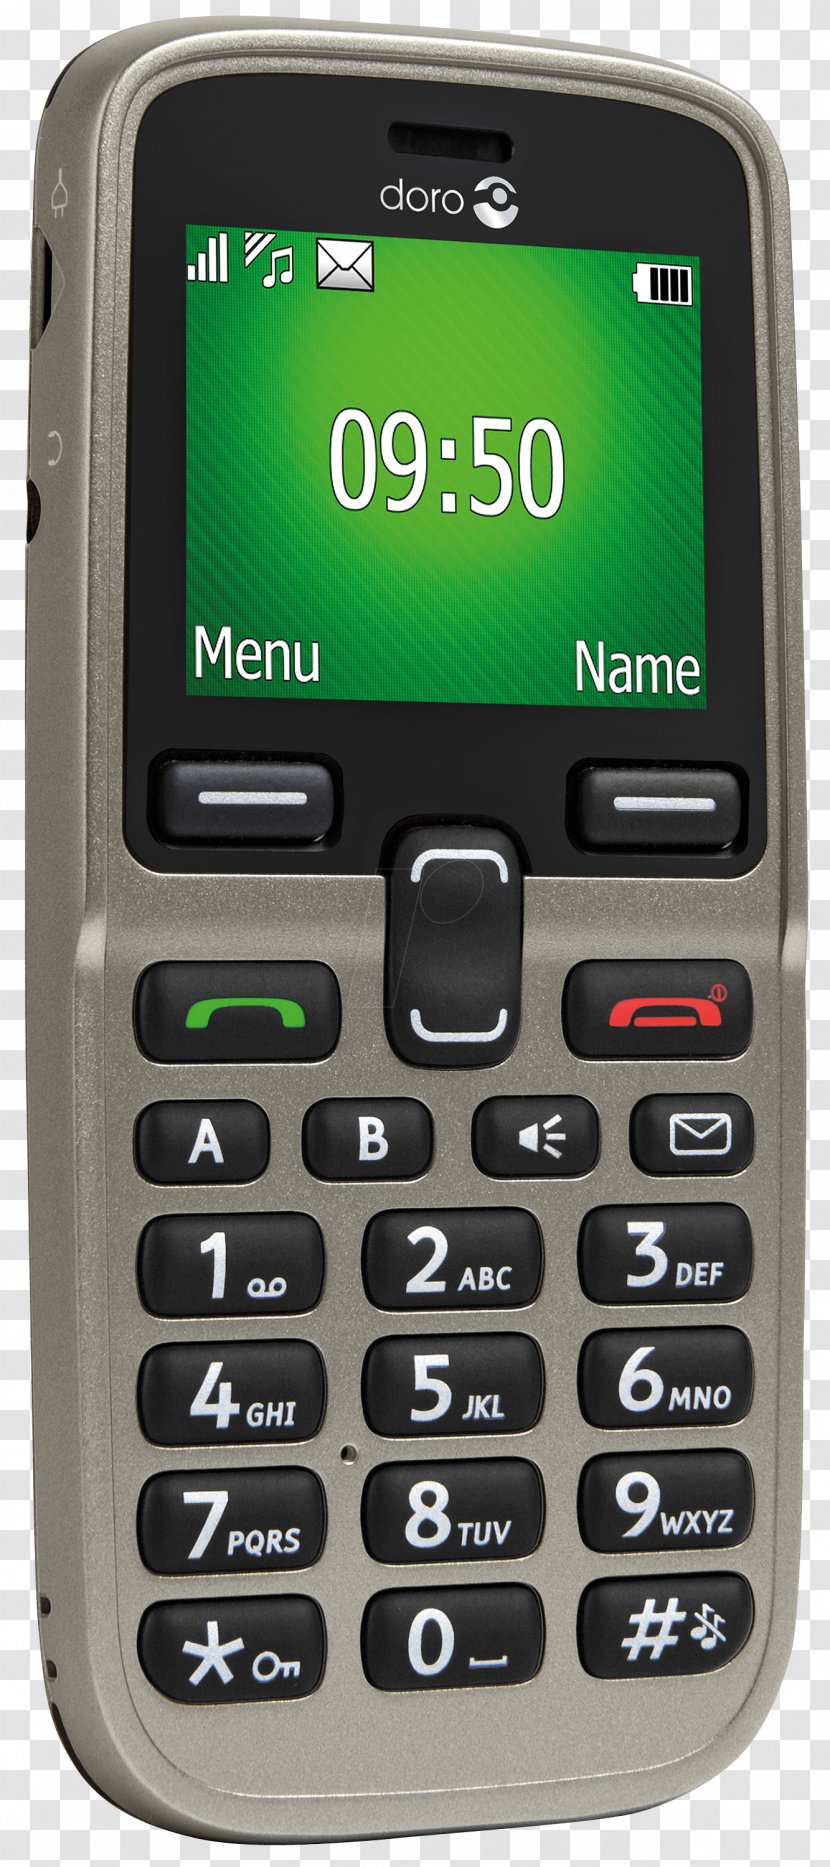 Doro 2404 DORO 1361 Telephone Subscriber Identity Module PhoneEasy 530X - Portable Communications Device - Champagne Transparent PNG